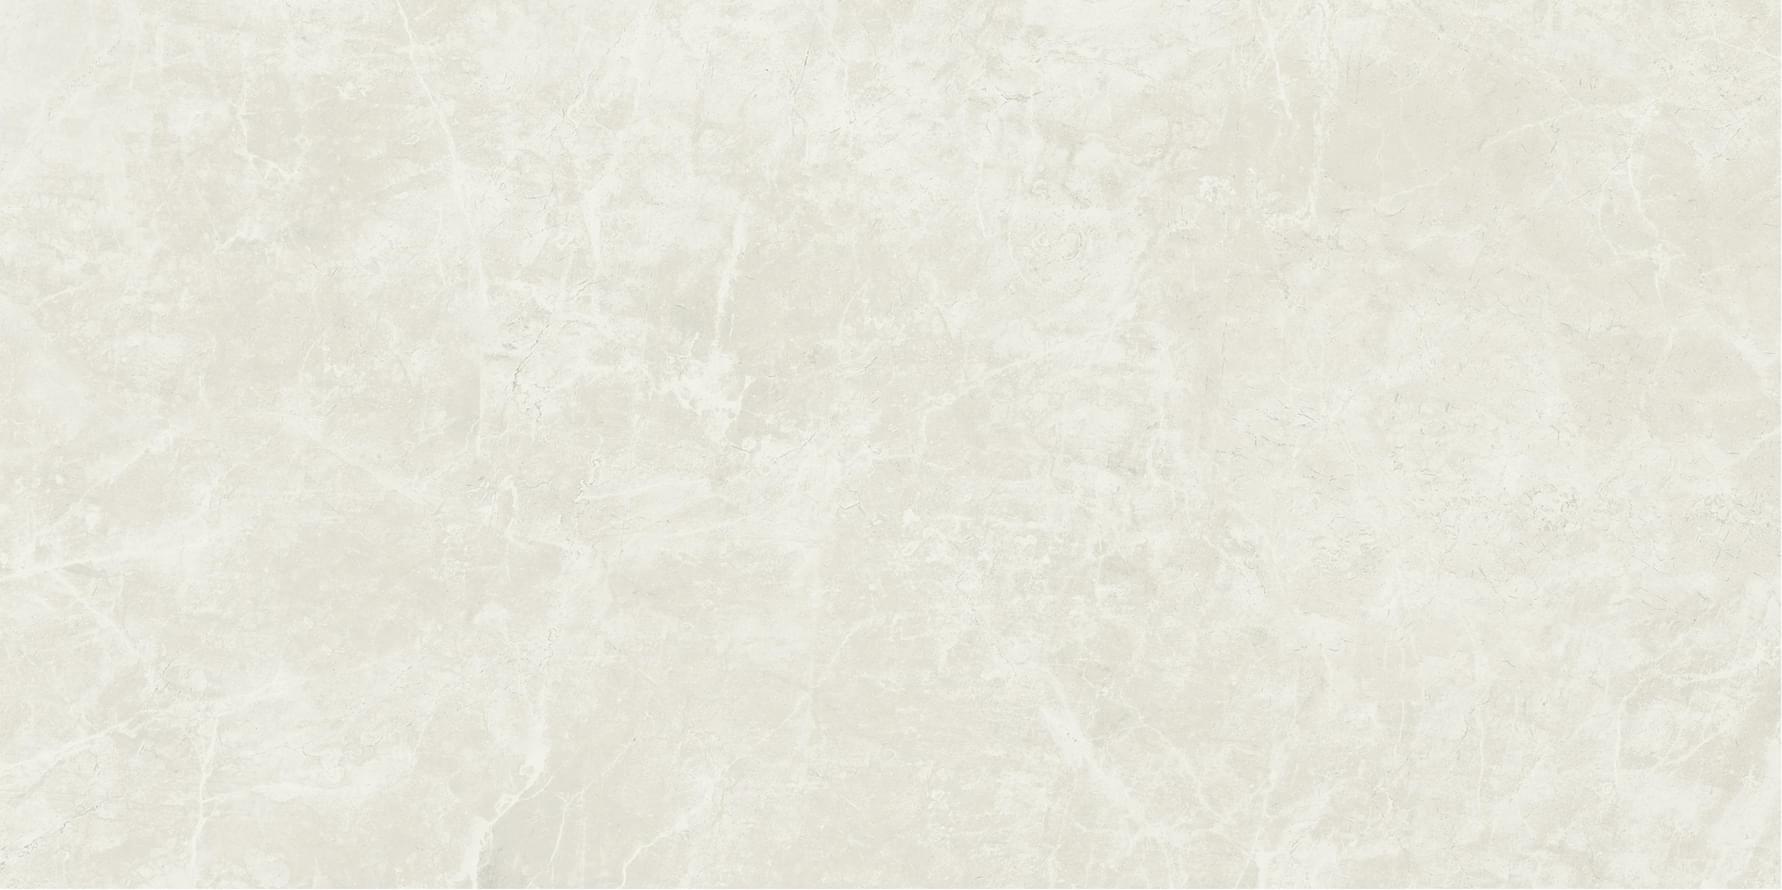 Magica Marstood Marble 04 Pulpis Beige Polished Rectified 30x60